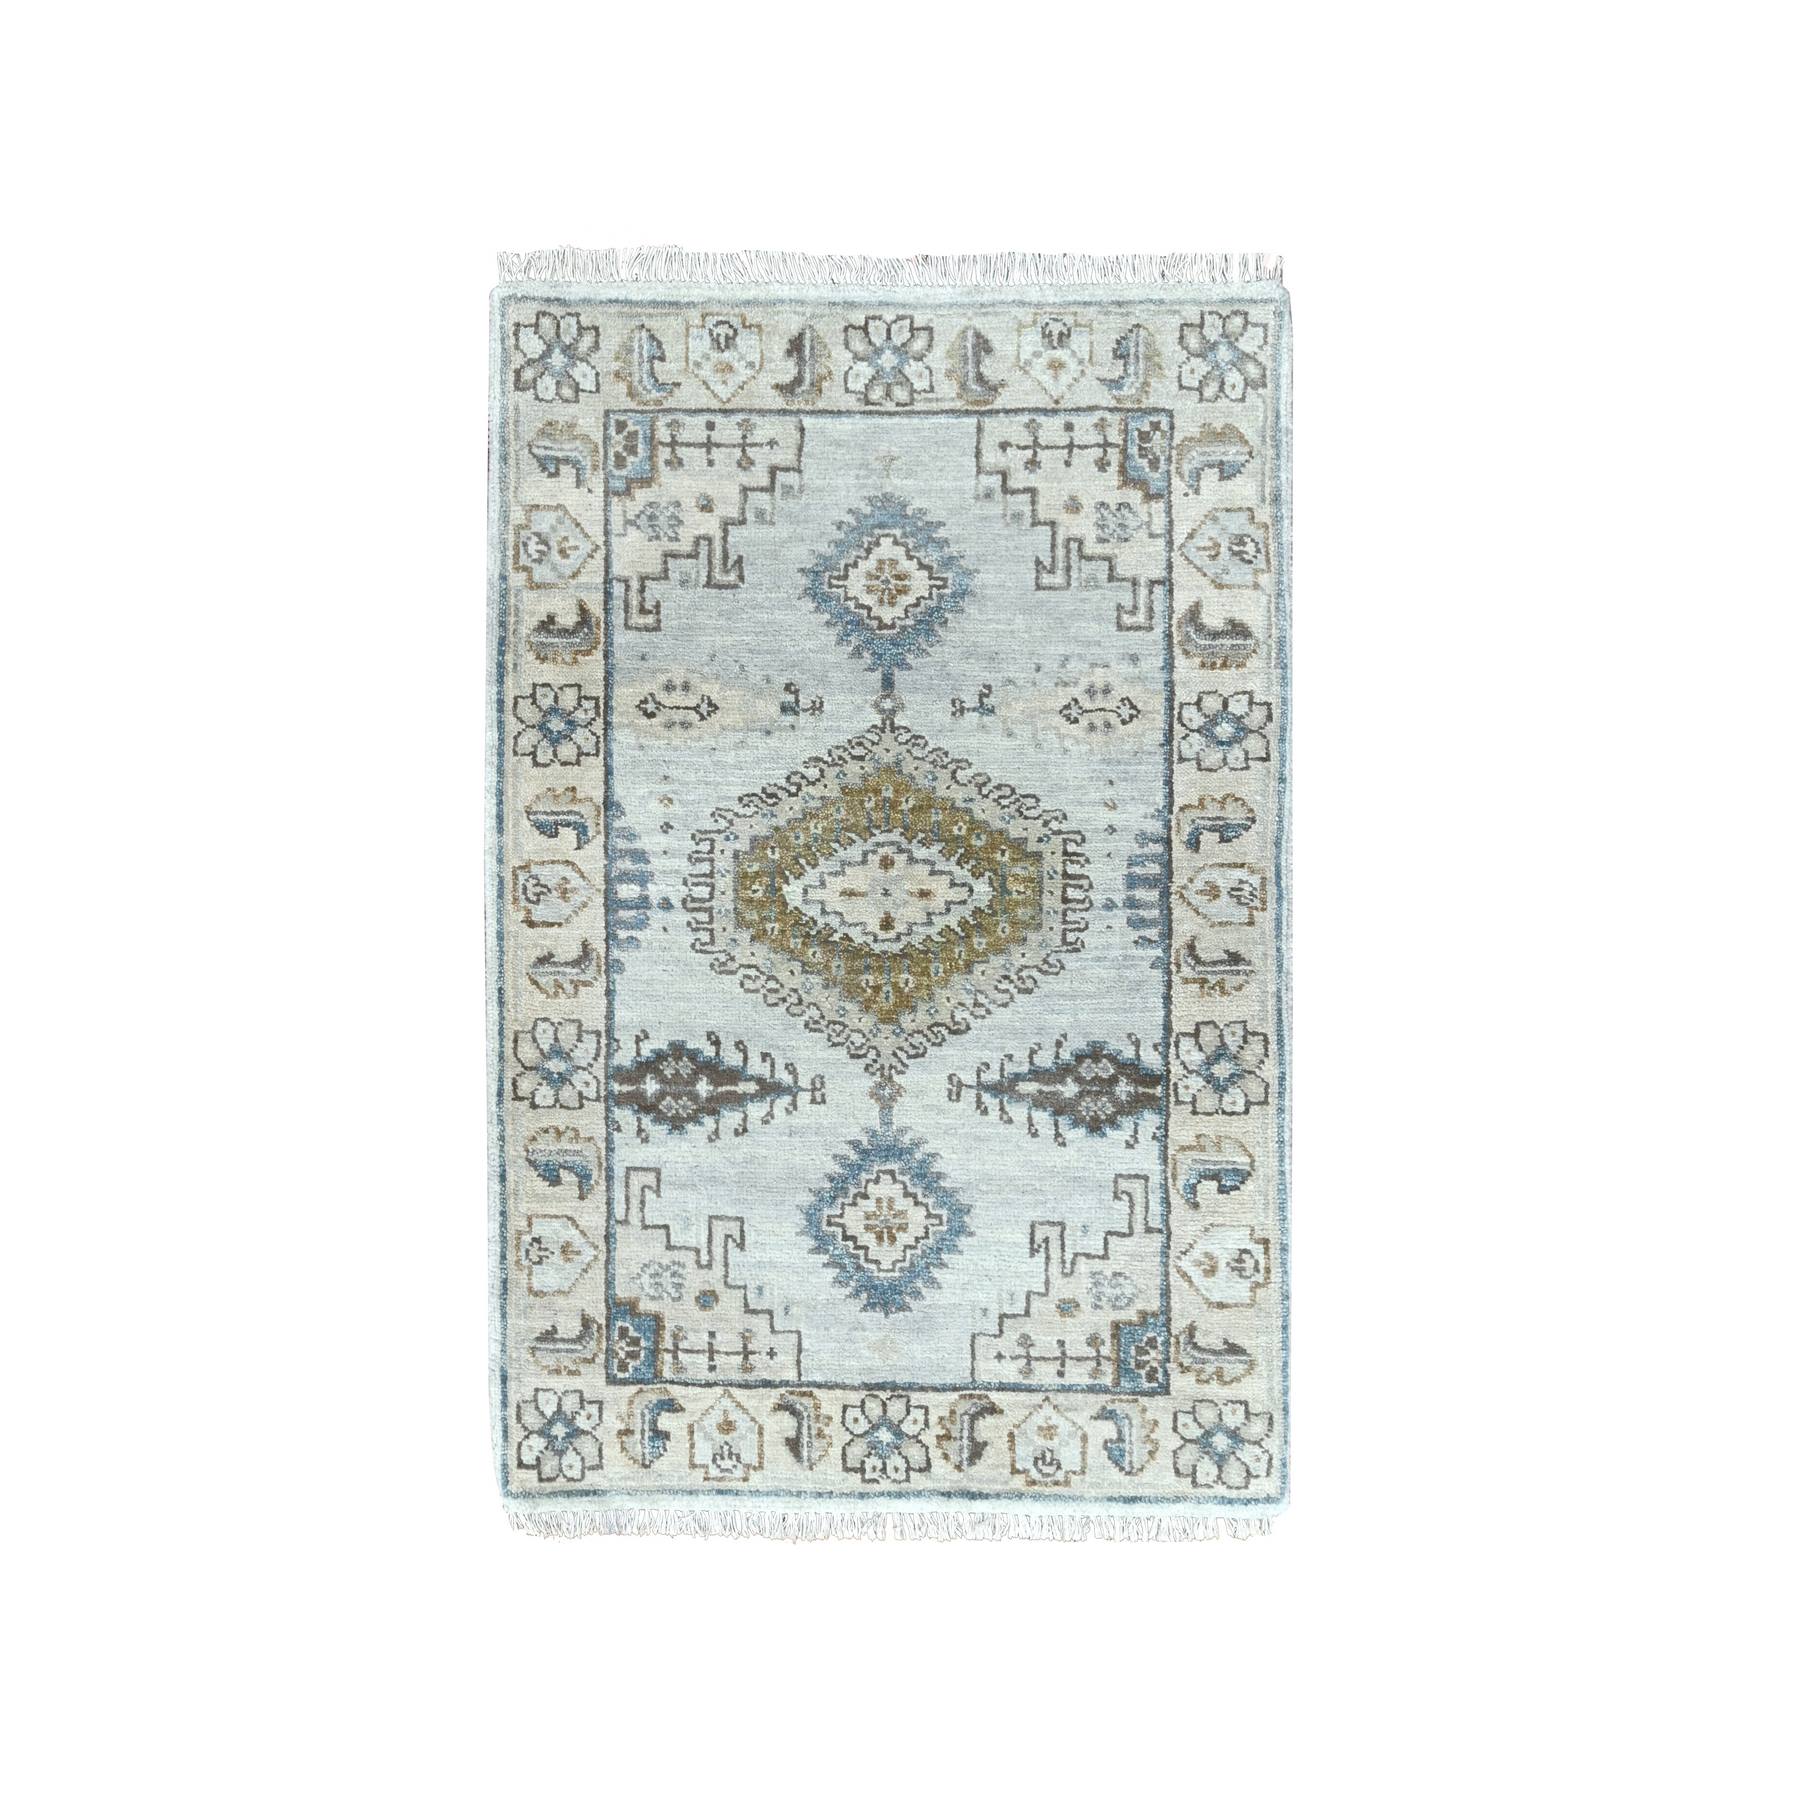 Stardew Gray And Shoji White Border, Vegetable Dyes, Hand Knotted Densely Woven Persian Village Influence Geometric Elements Design, Pure Wool, Mat Oriental Rug